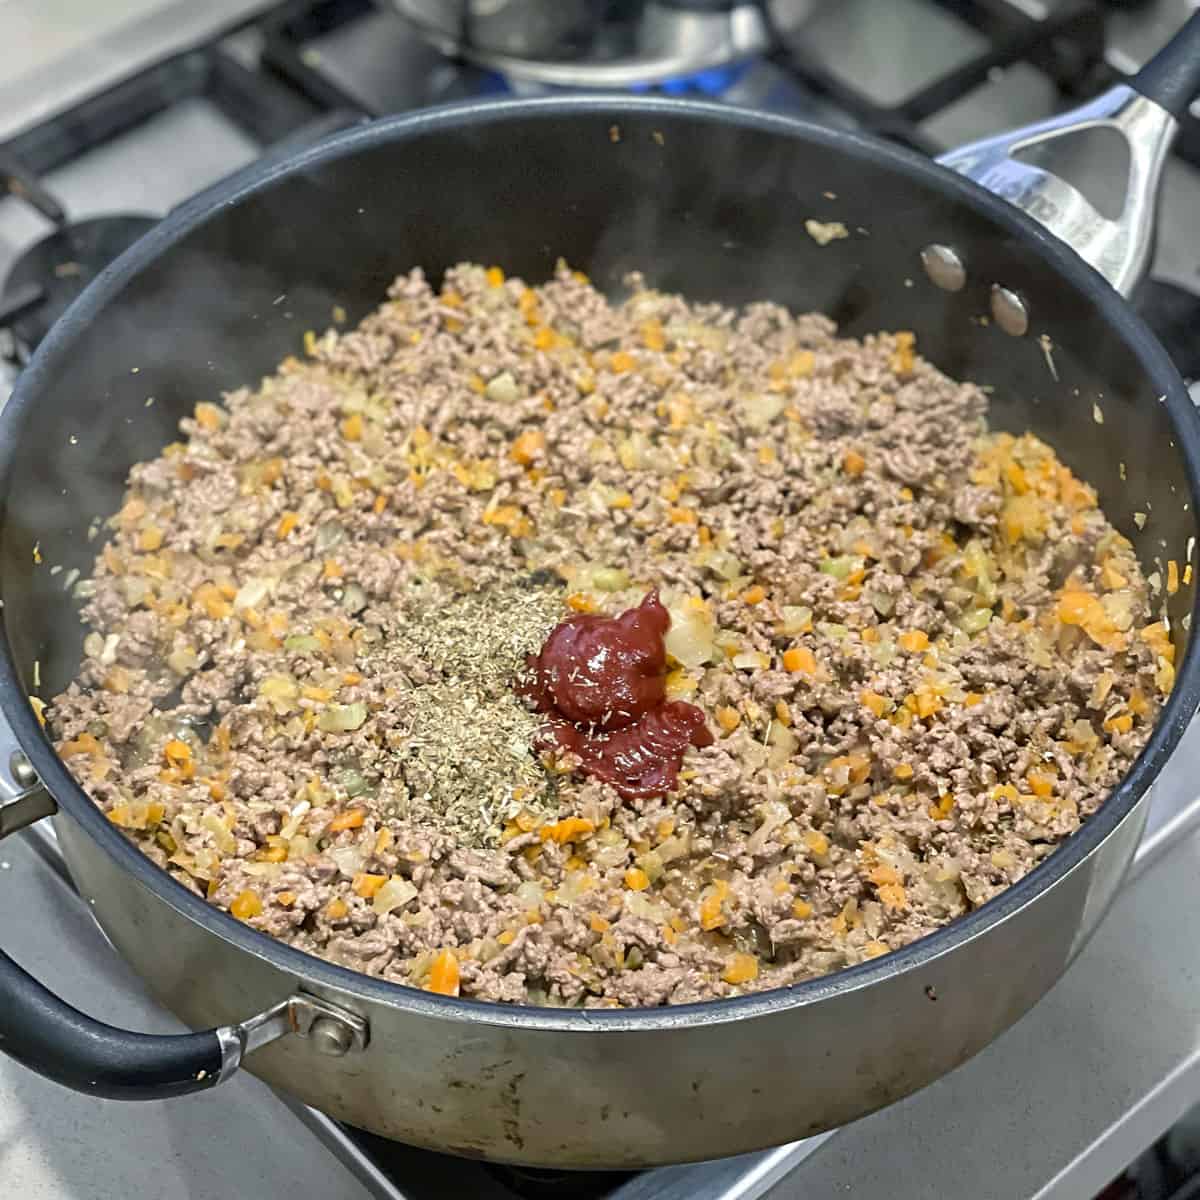 Mince, tomato paste and herbs cooking in a pan.